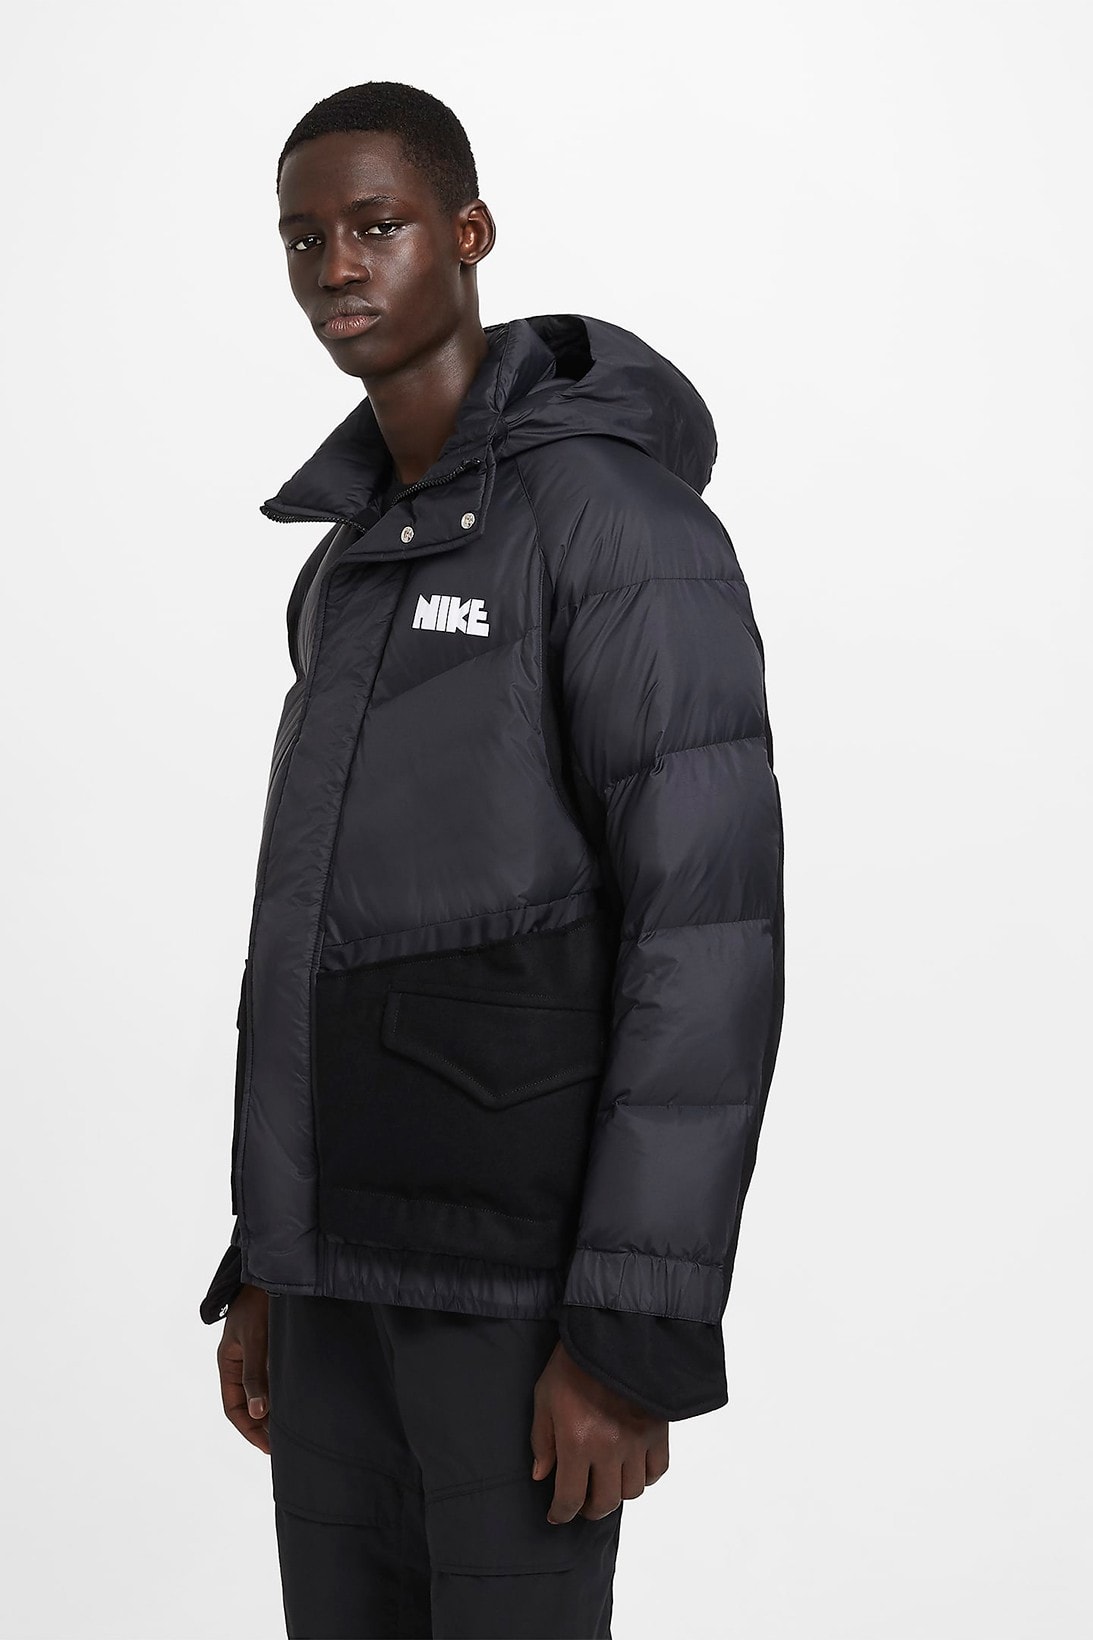 nike sacai chitose abe collaboration outerwear collection jackets puffers release date